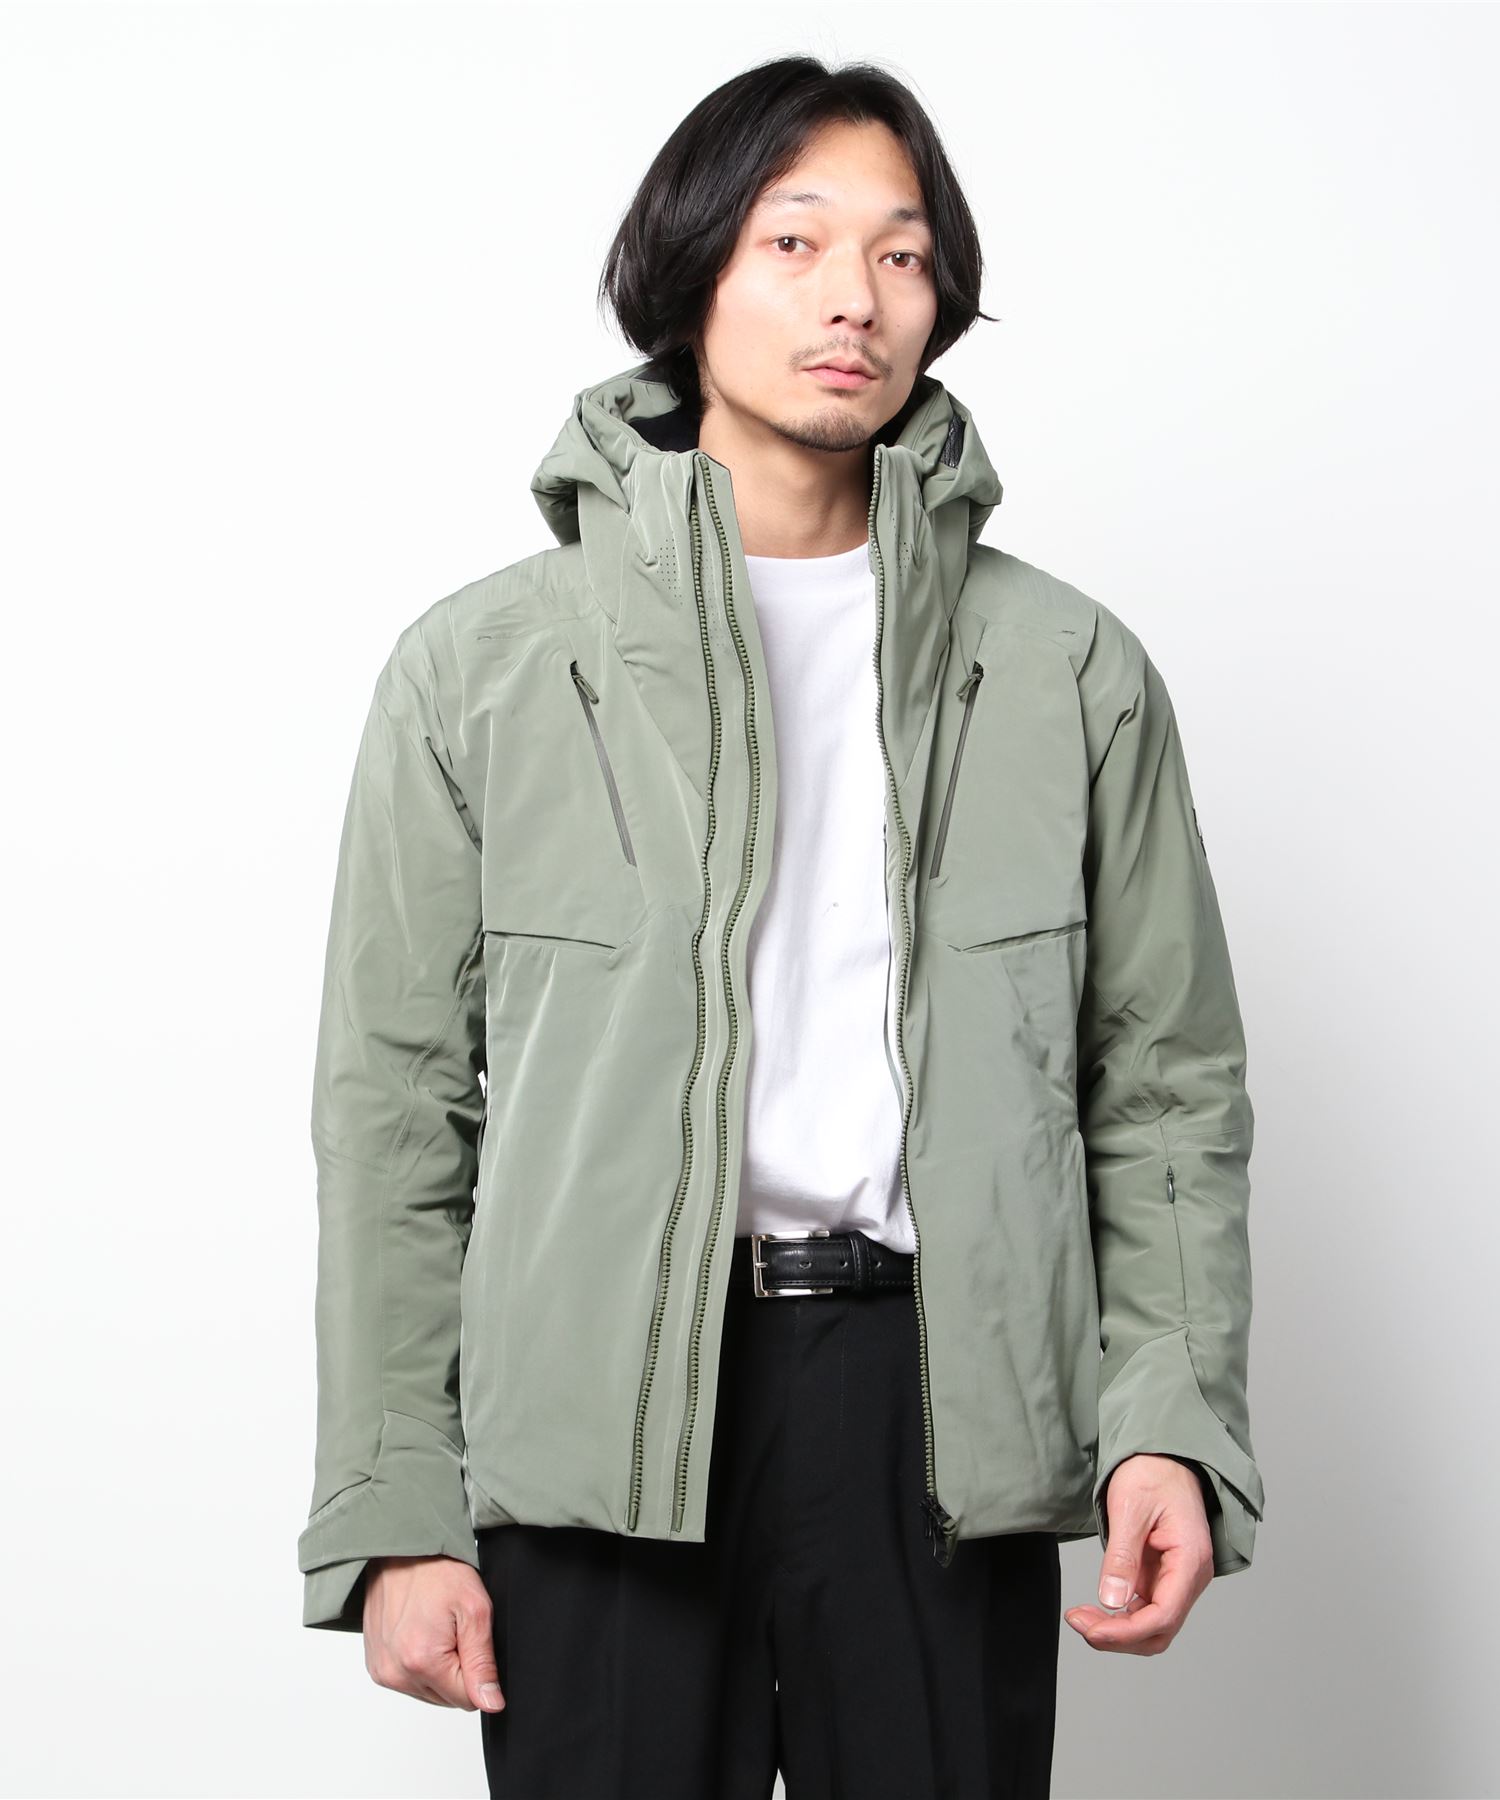 atmosDESCENTE INSULATED JACKET ジャケット デサント 激安挑戦中 2022A W新作送料無料 インシュレイテッド